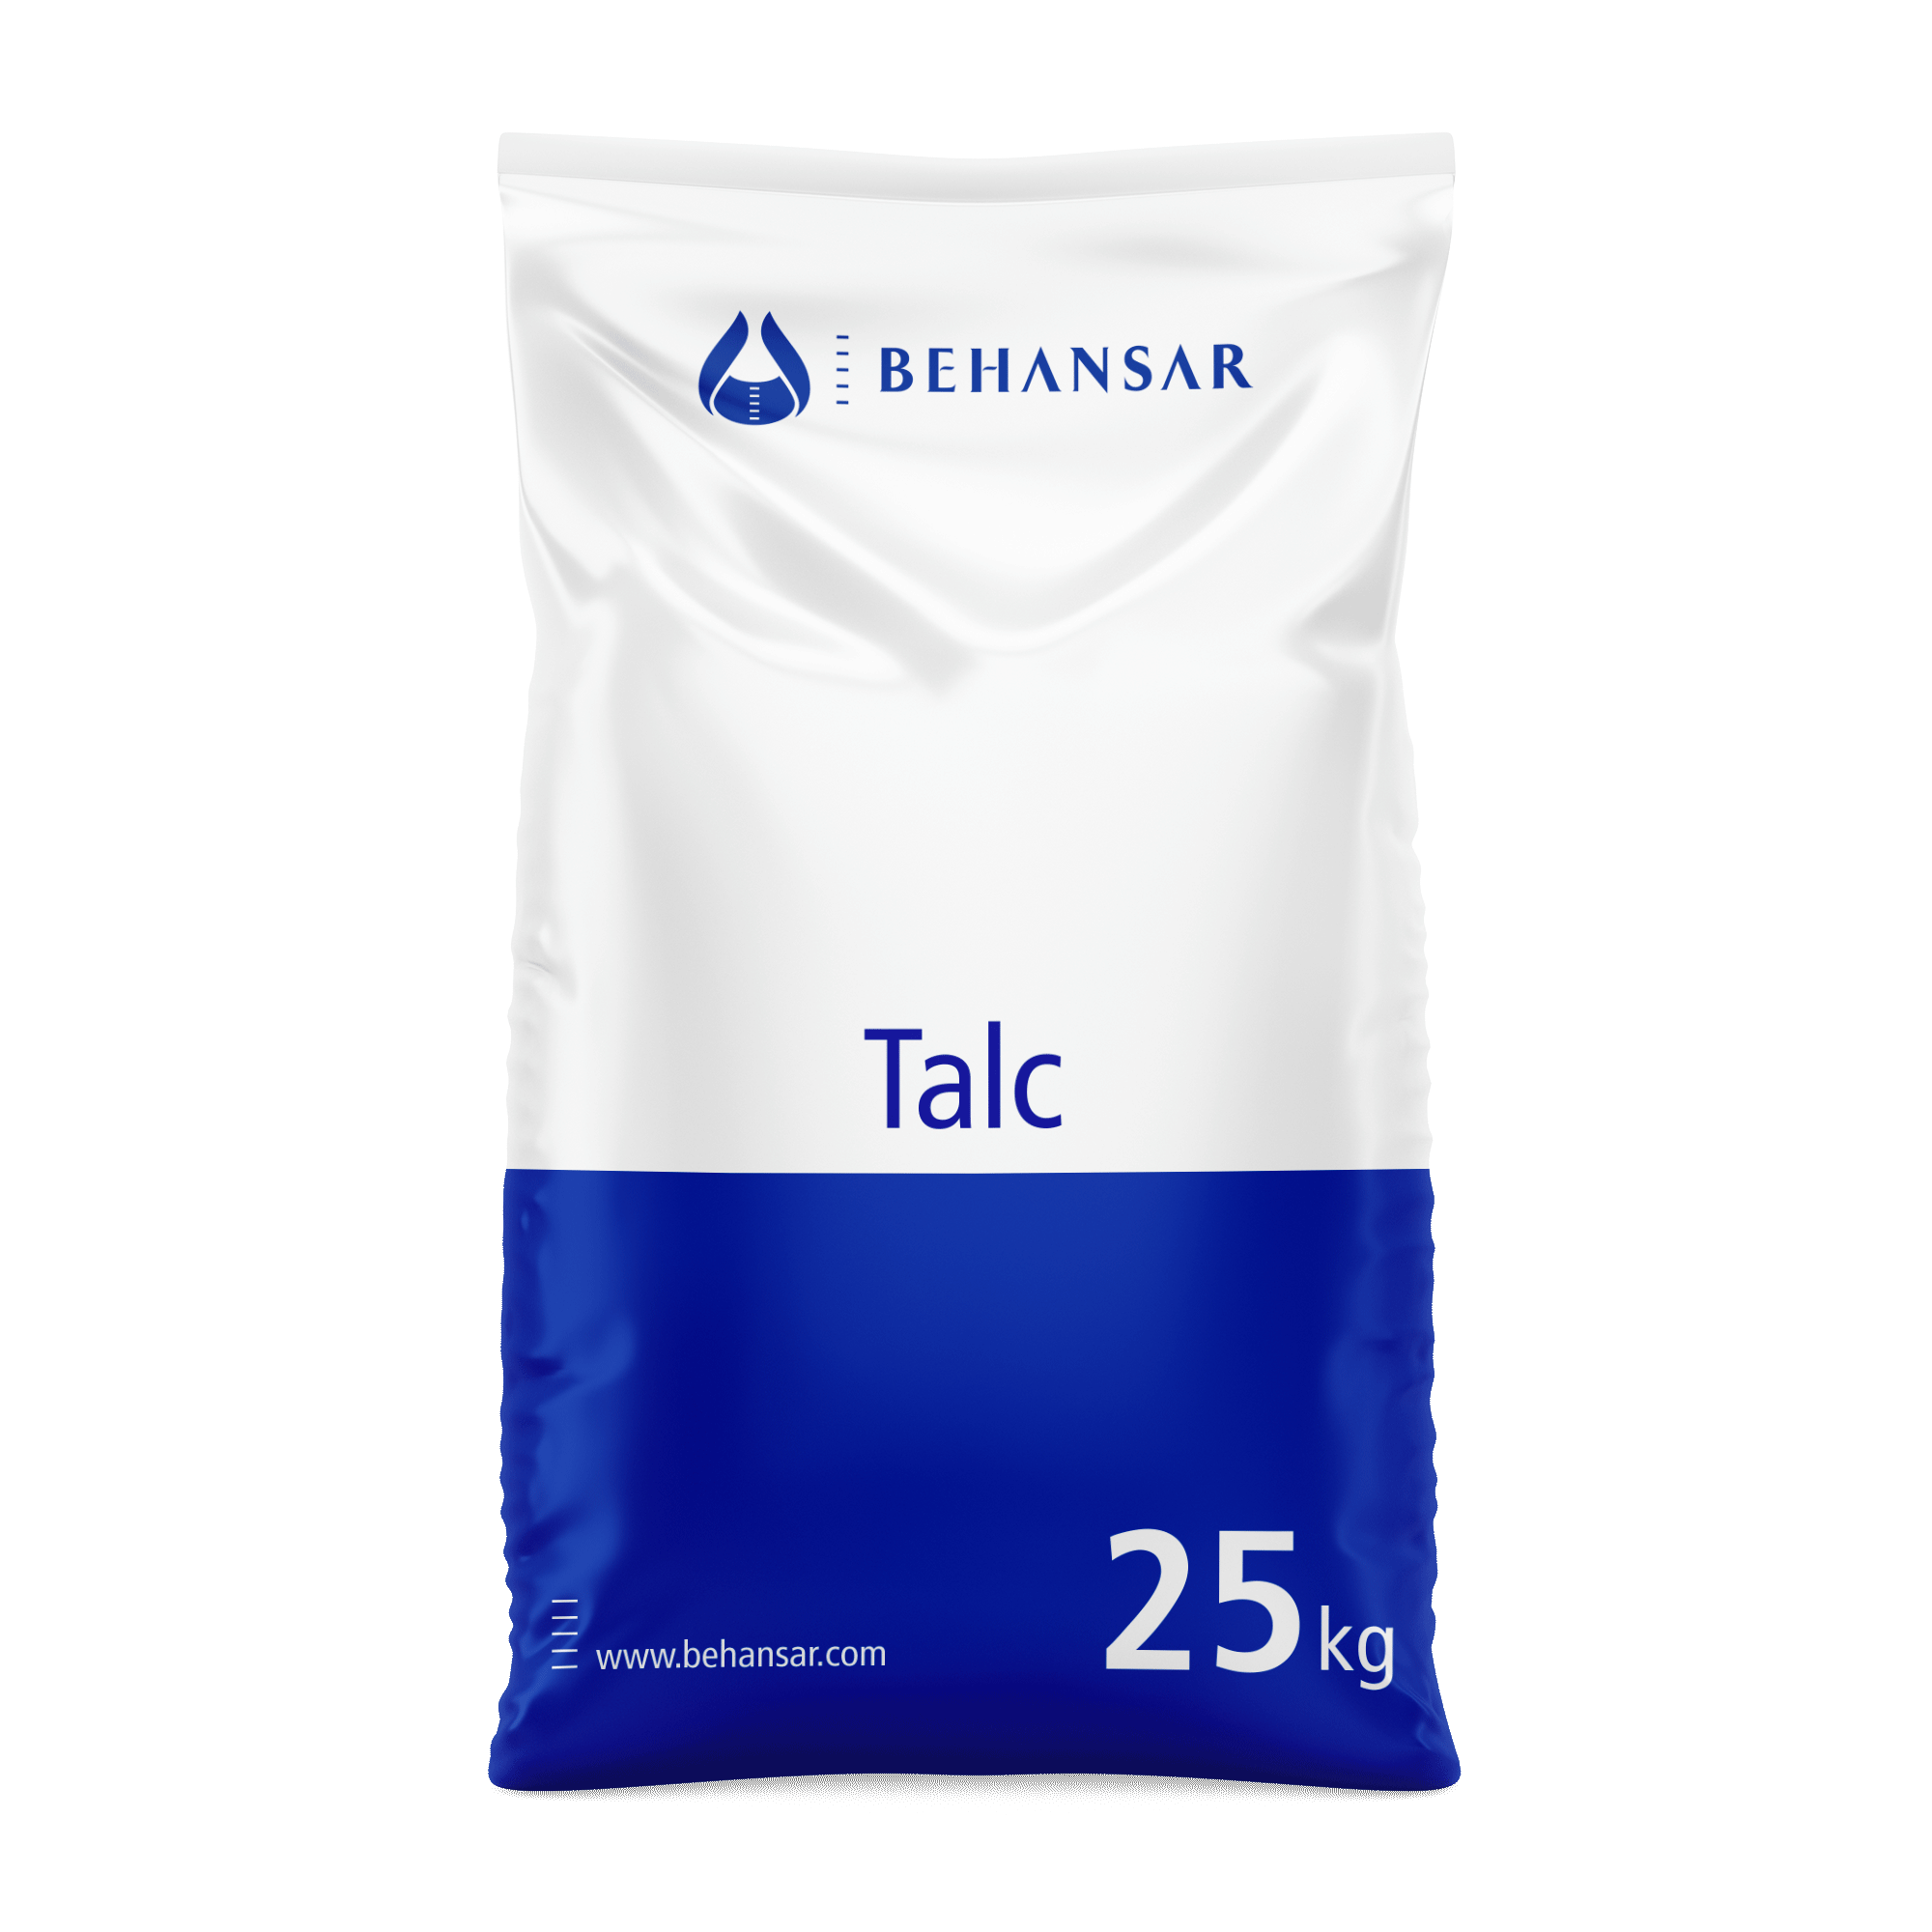 Talc is one of the products of Behansar Co